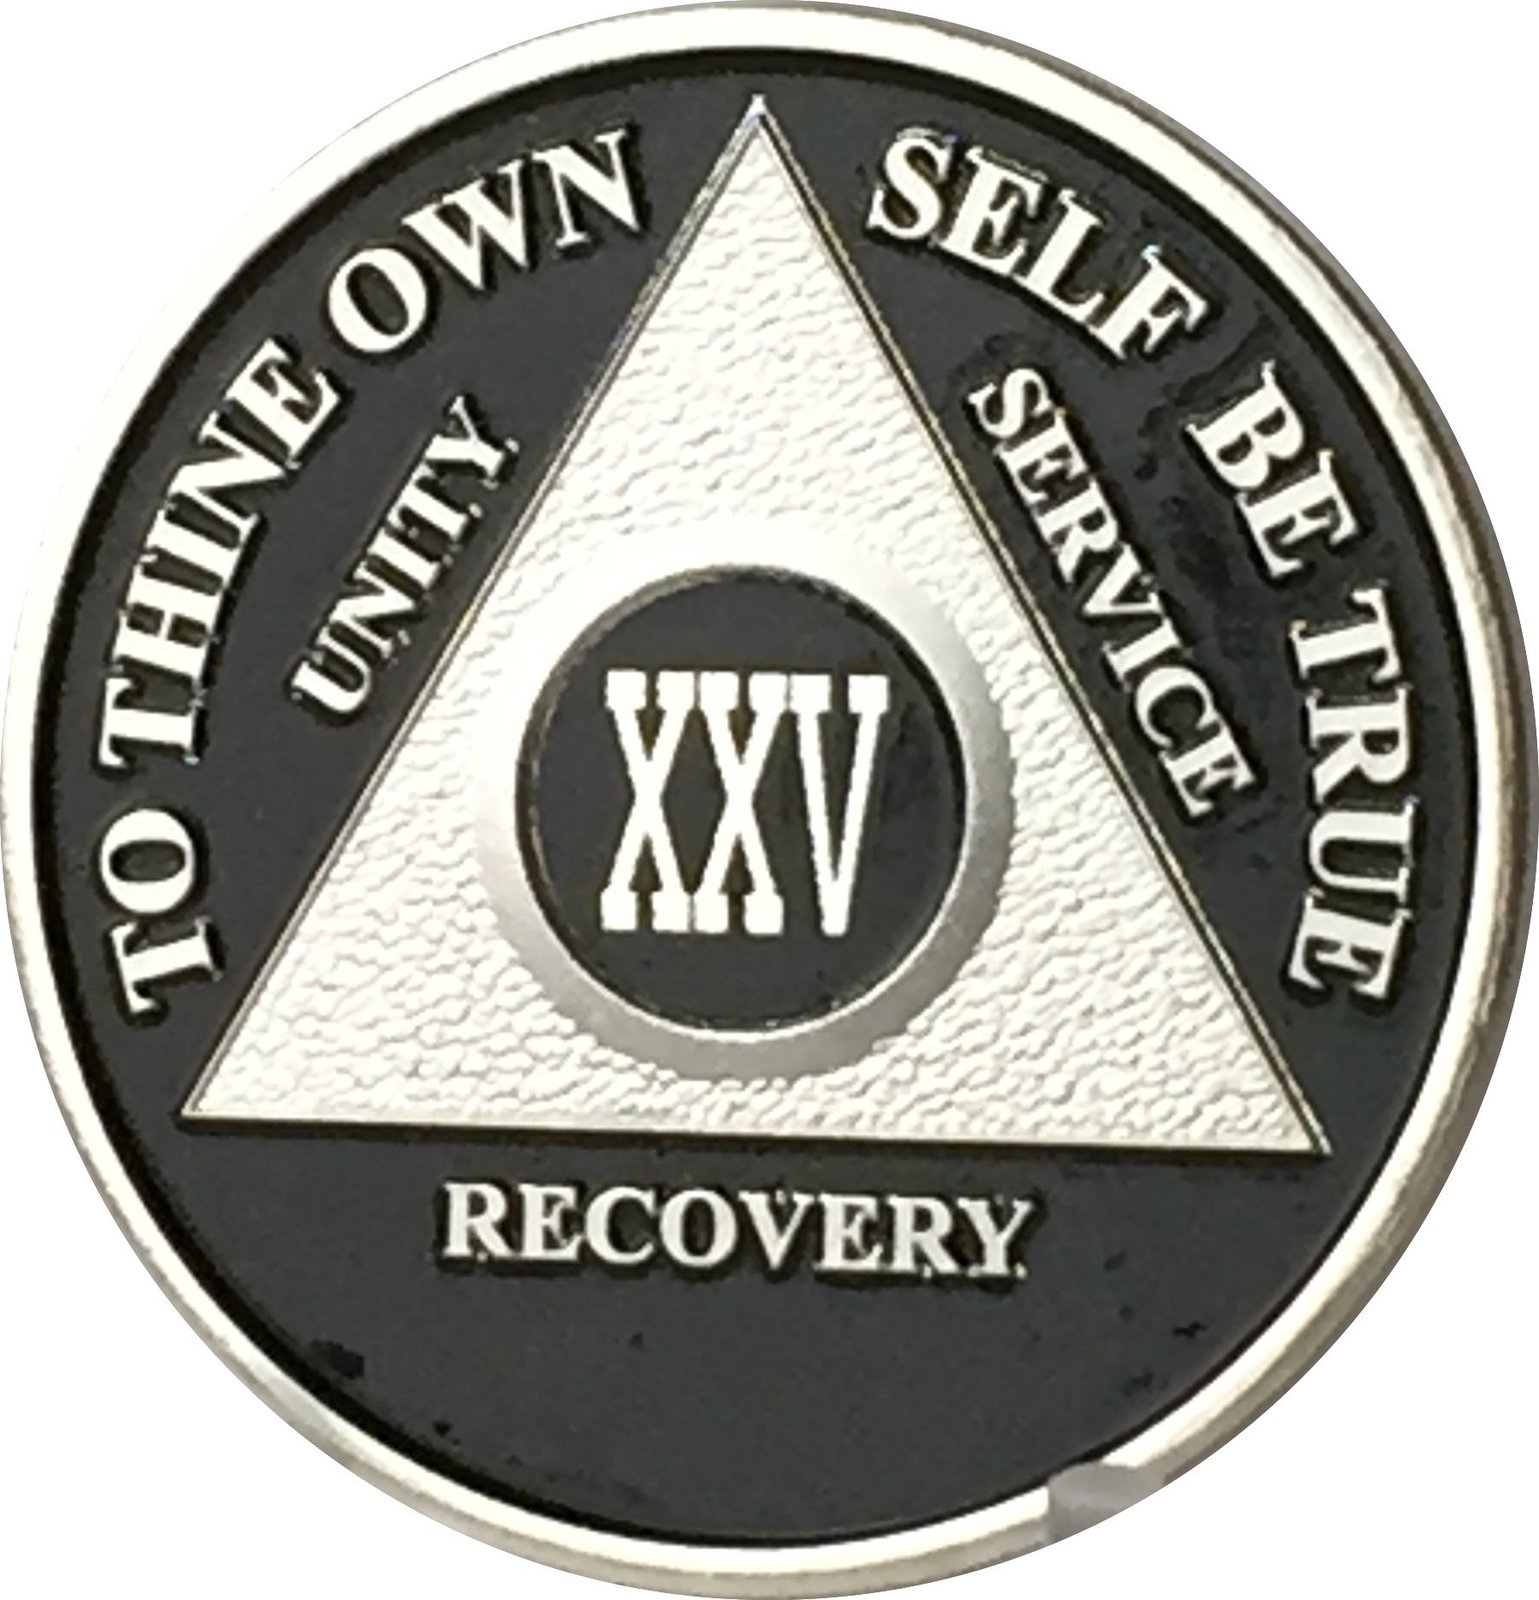 Black & Silver Plated 25 Year AA Alcoholics Anonymous Sobriety Medallion Vinyl P